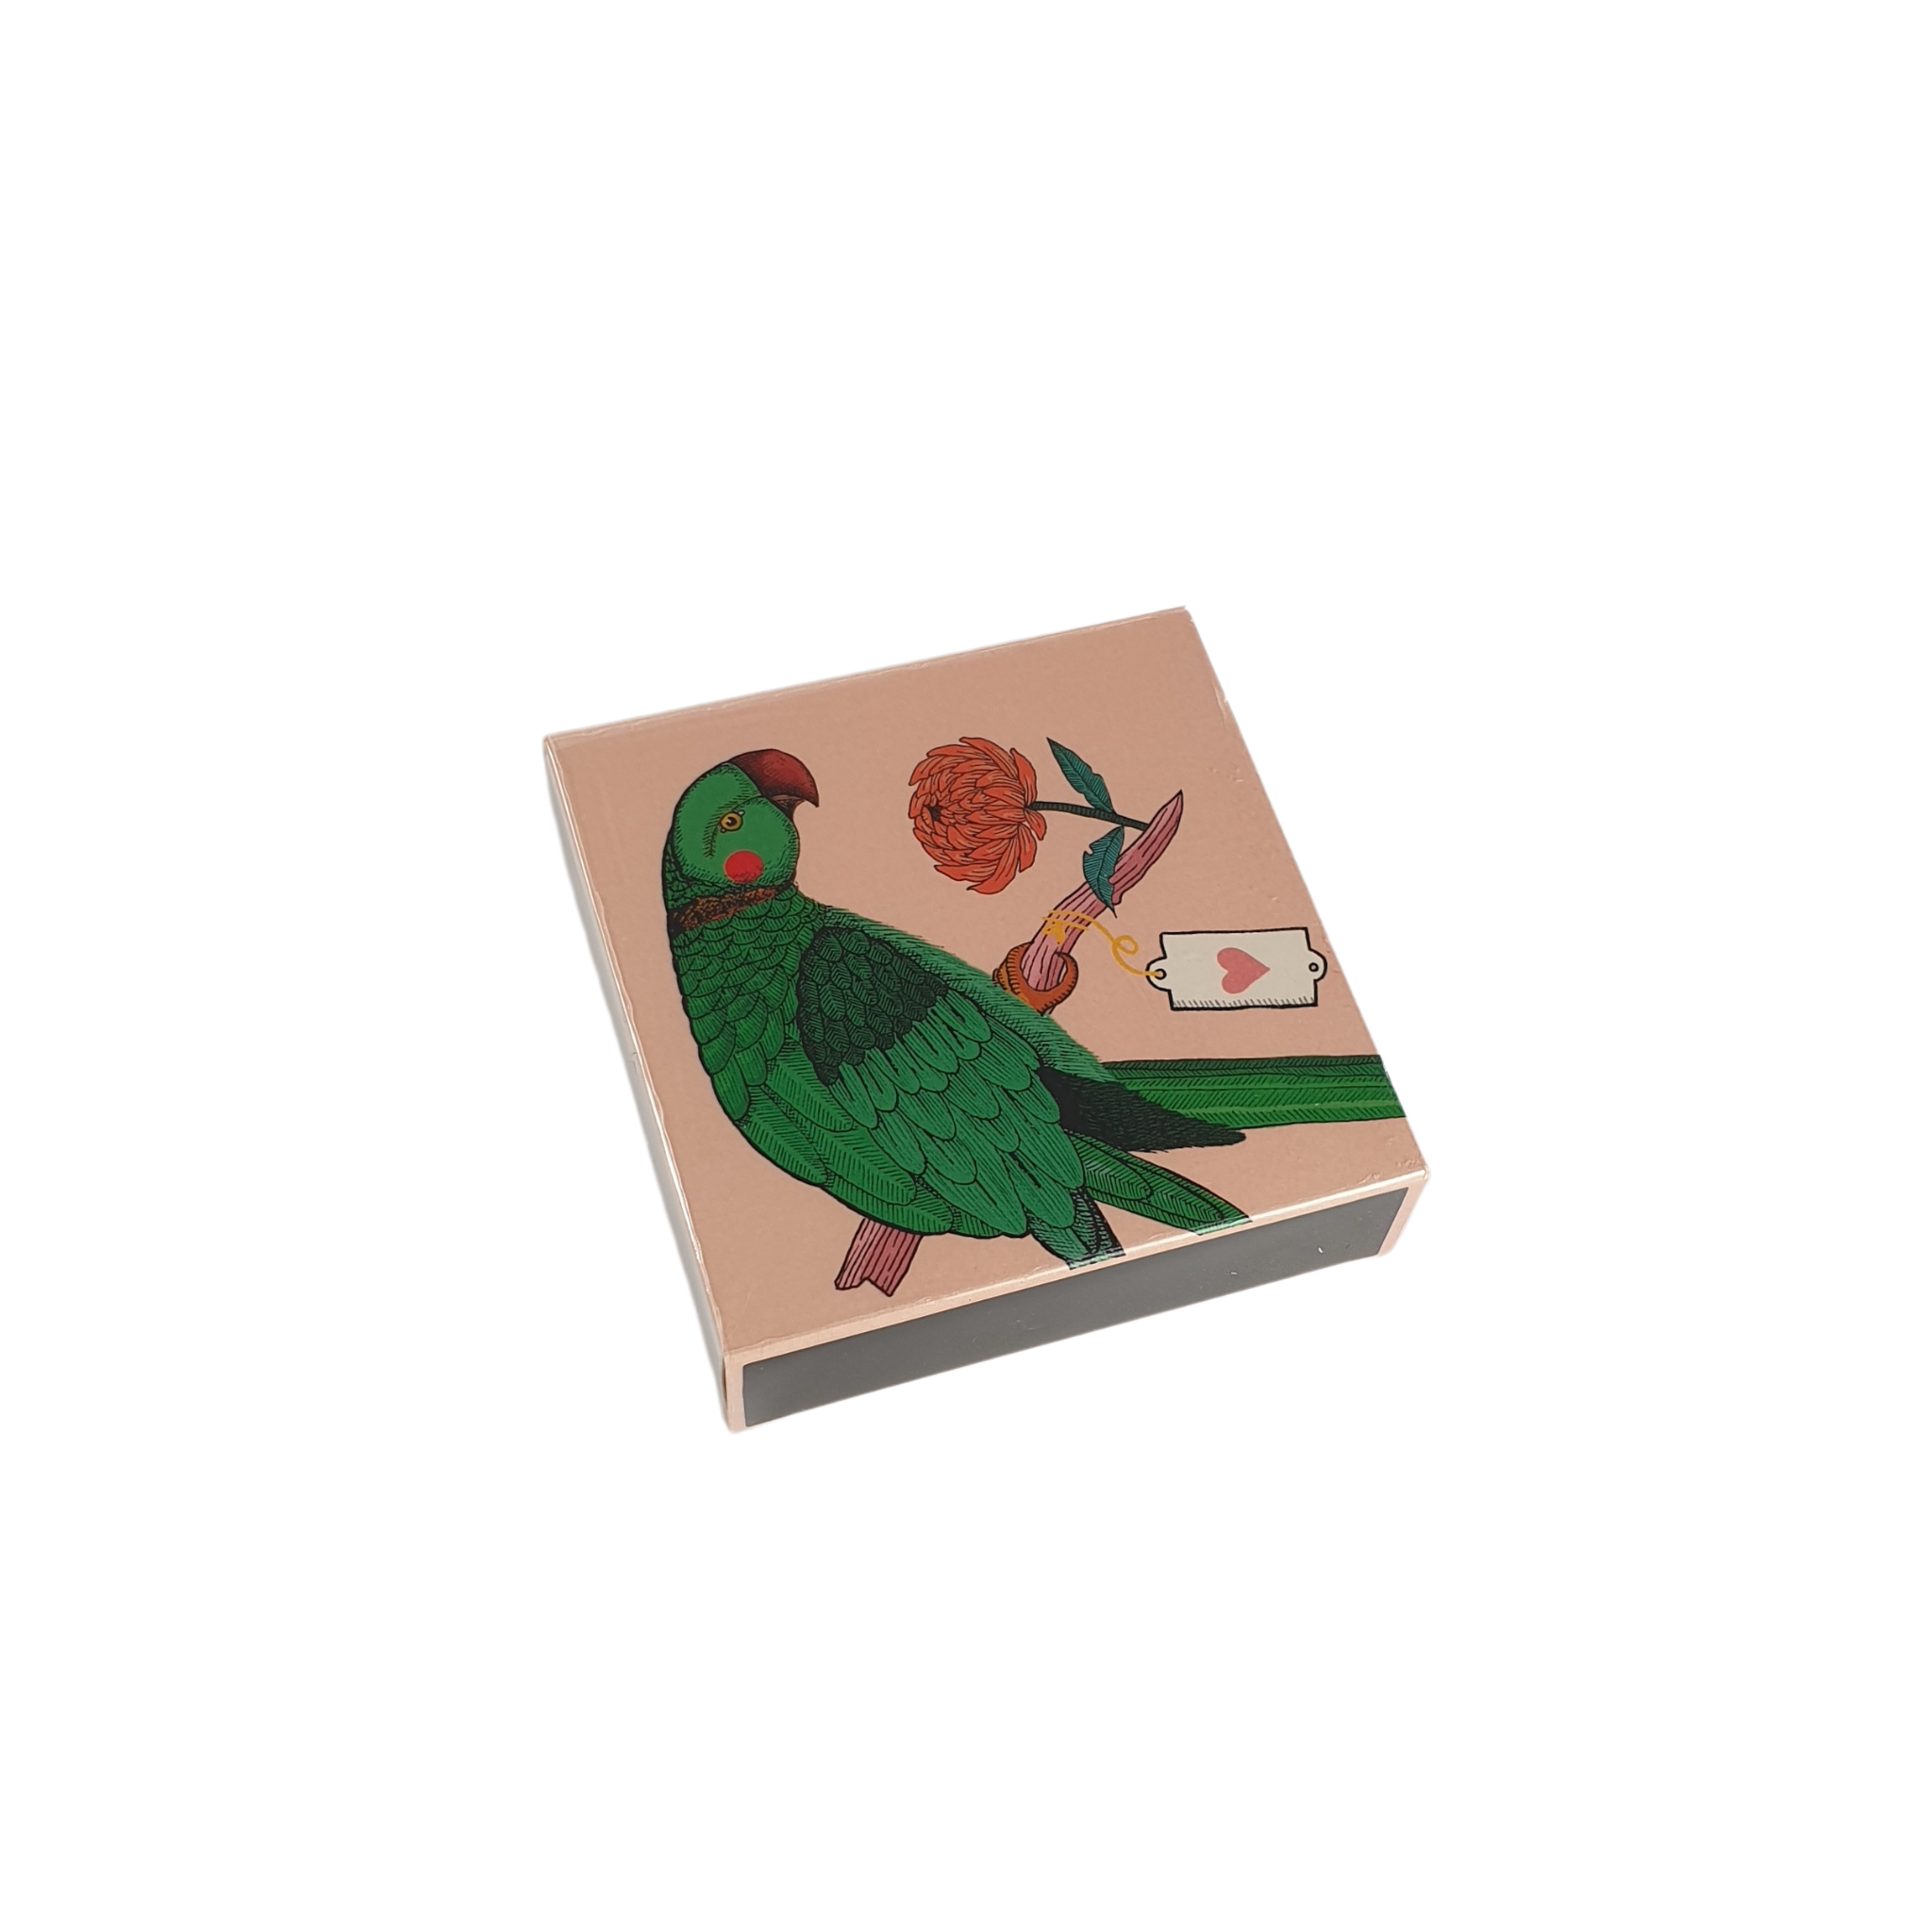 Ariane Parrot box of matches